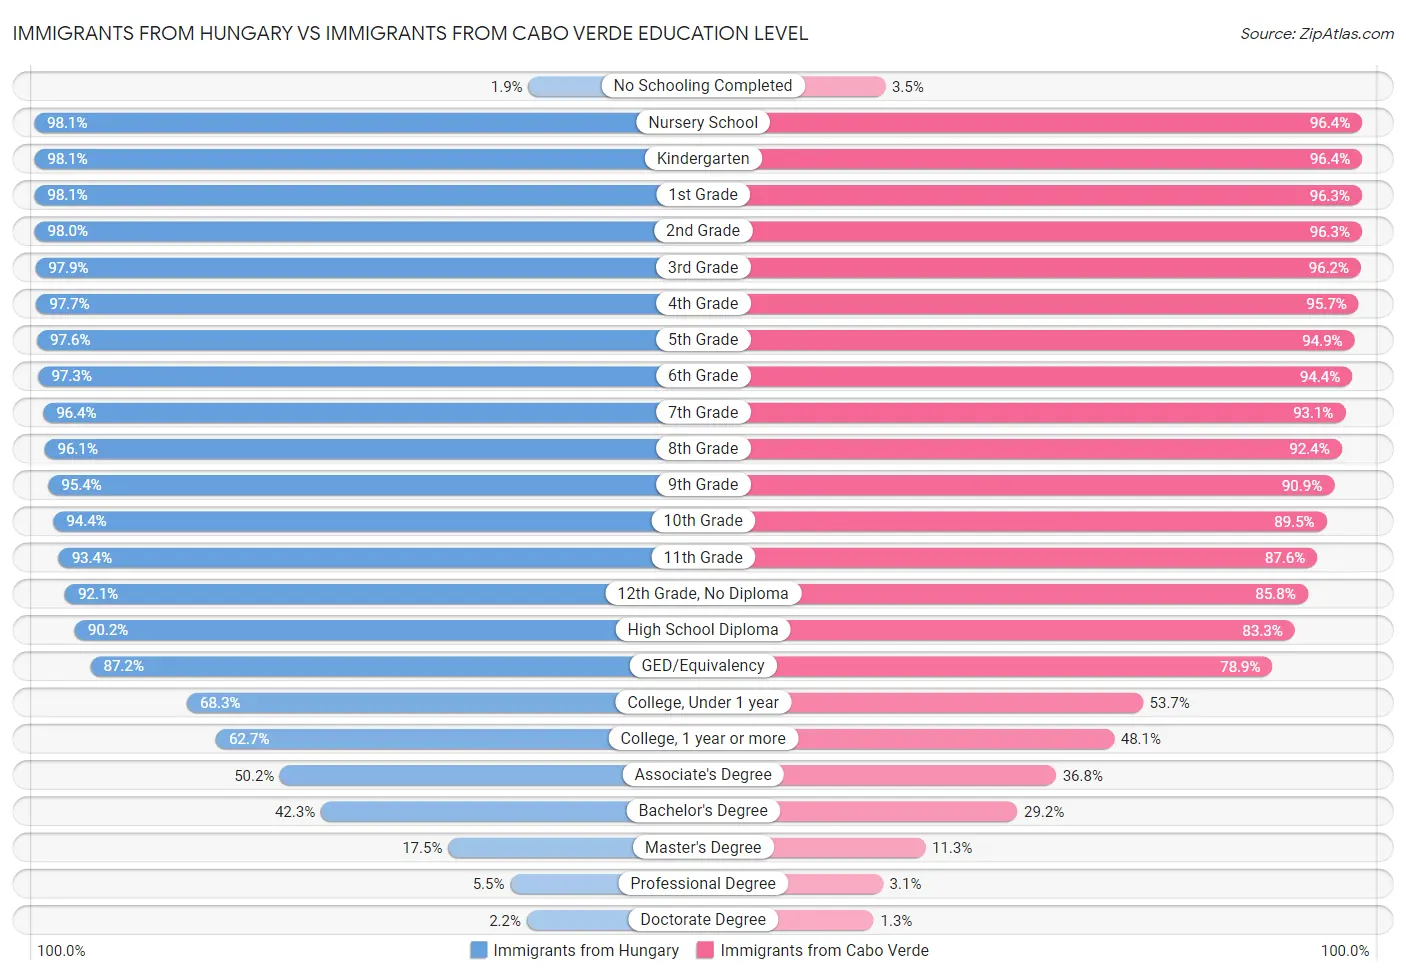 Immigrants from Hungary vs Immigrants from Cabo Verde Education Level